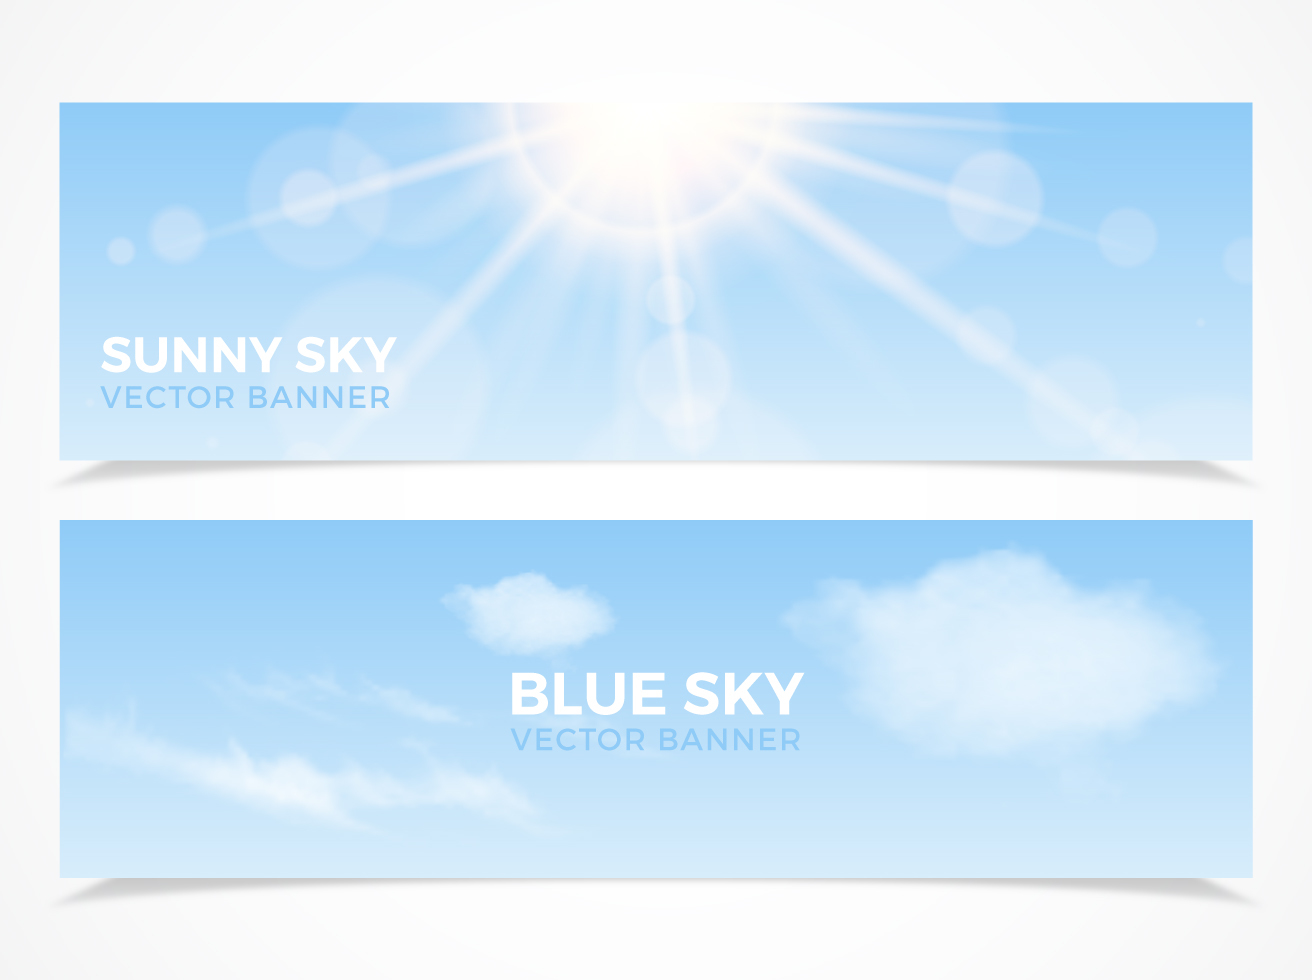 Free Sky Vector Banners Vector Art & Graphics | freevector.com